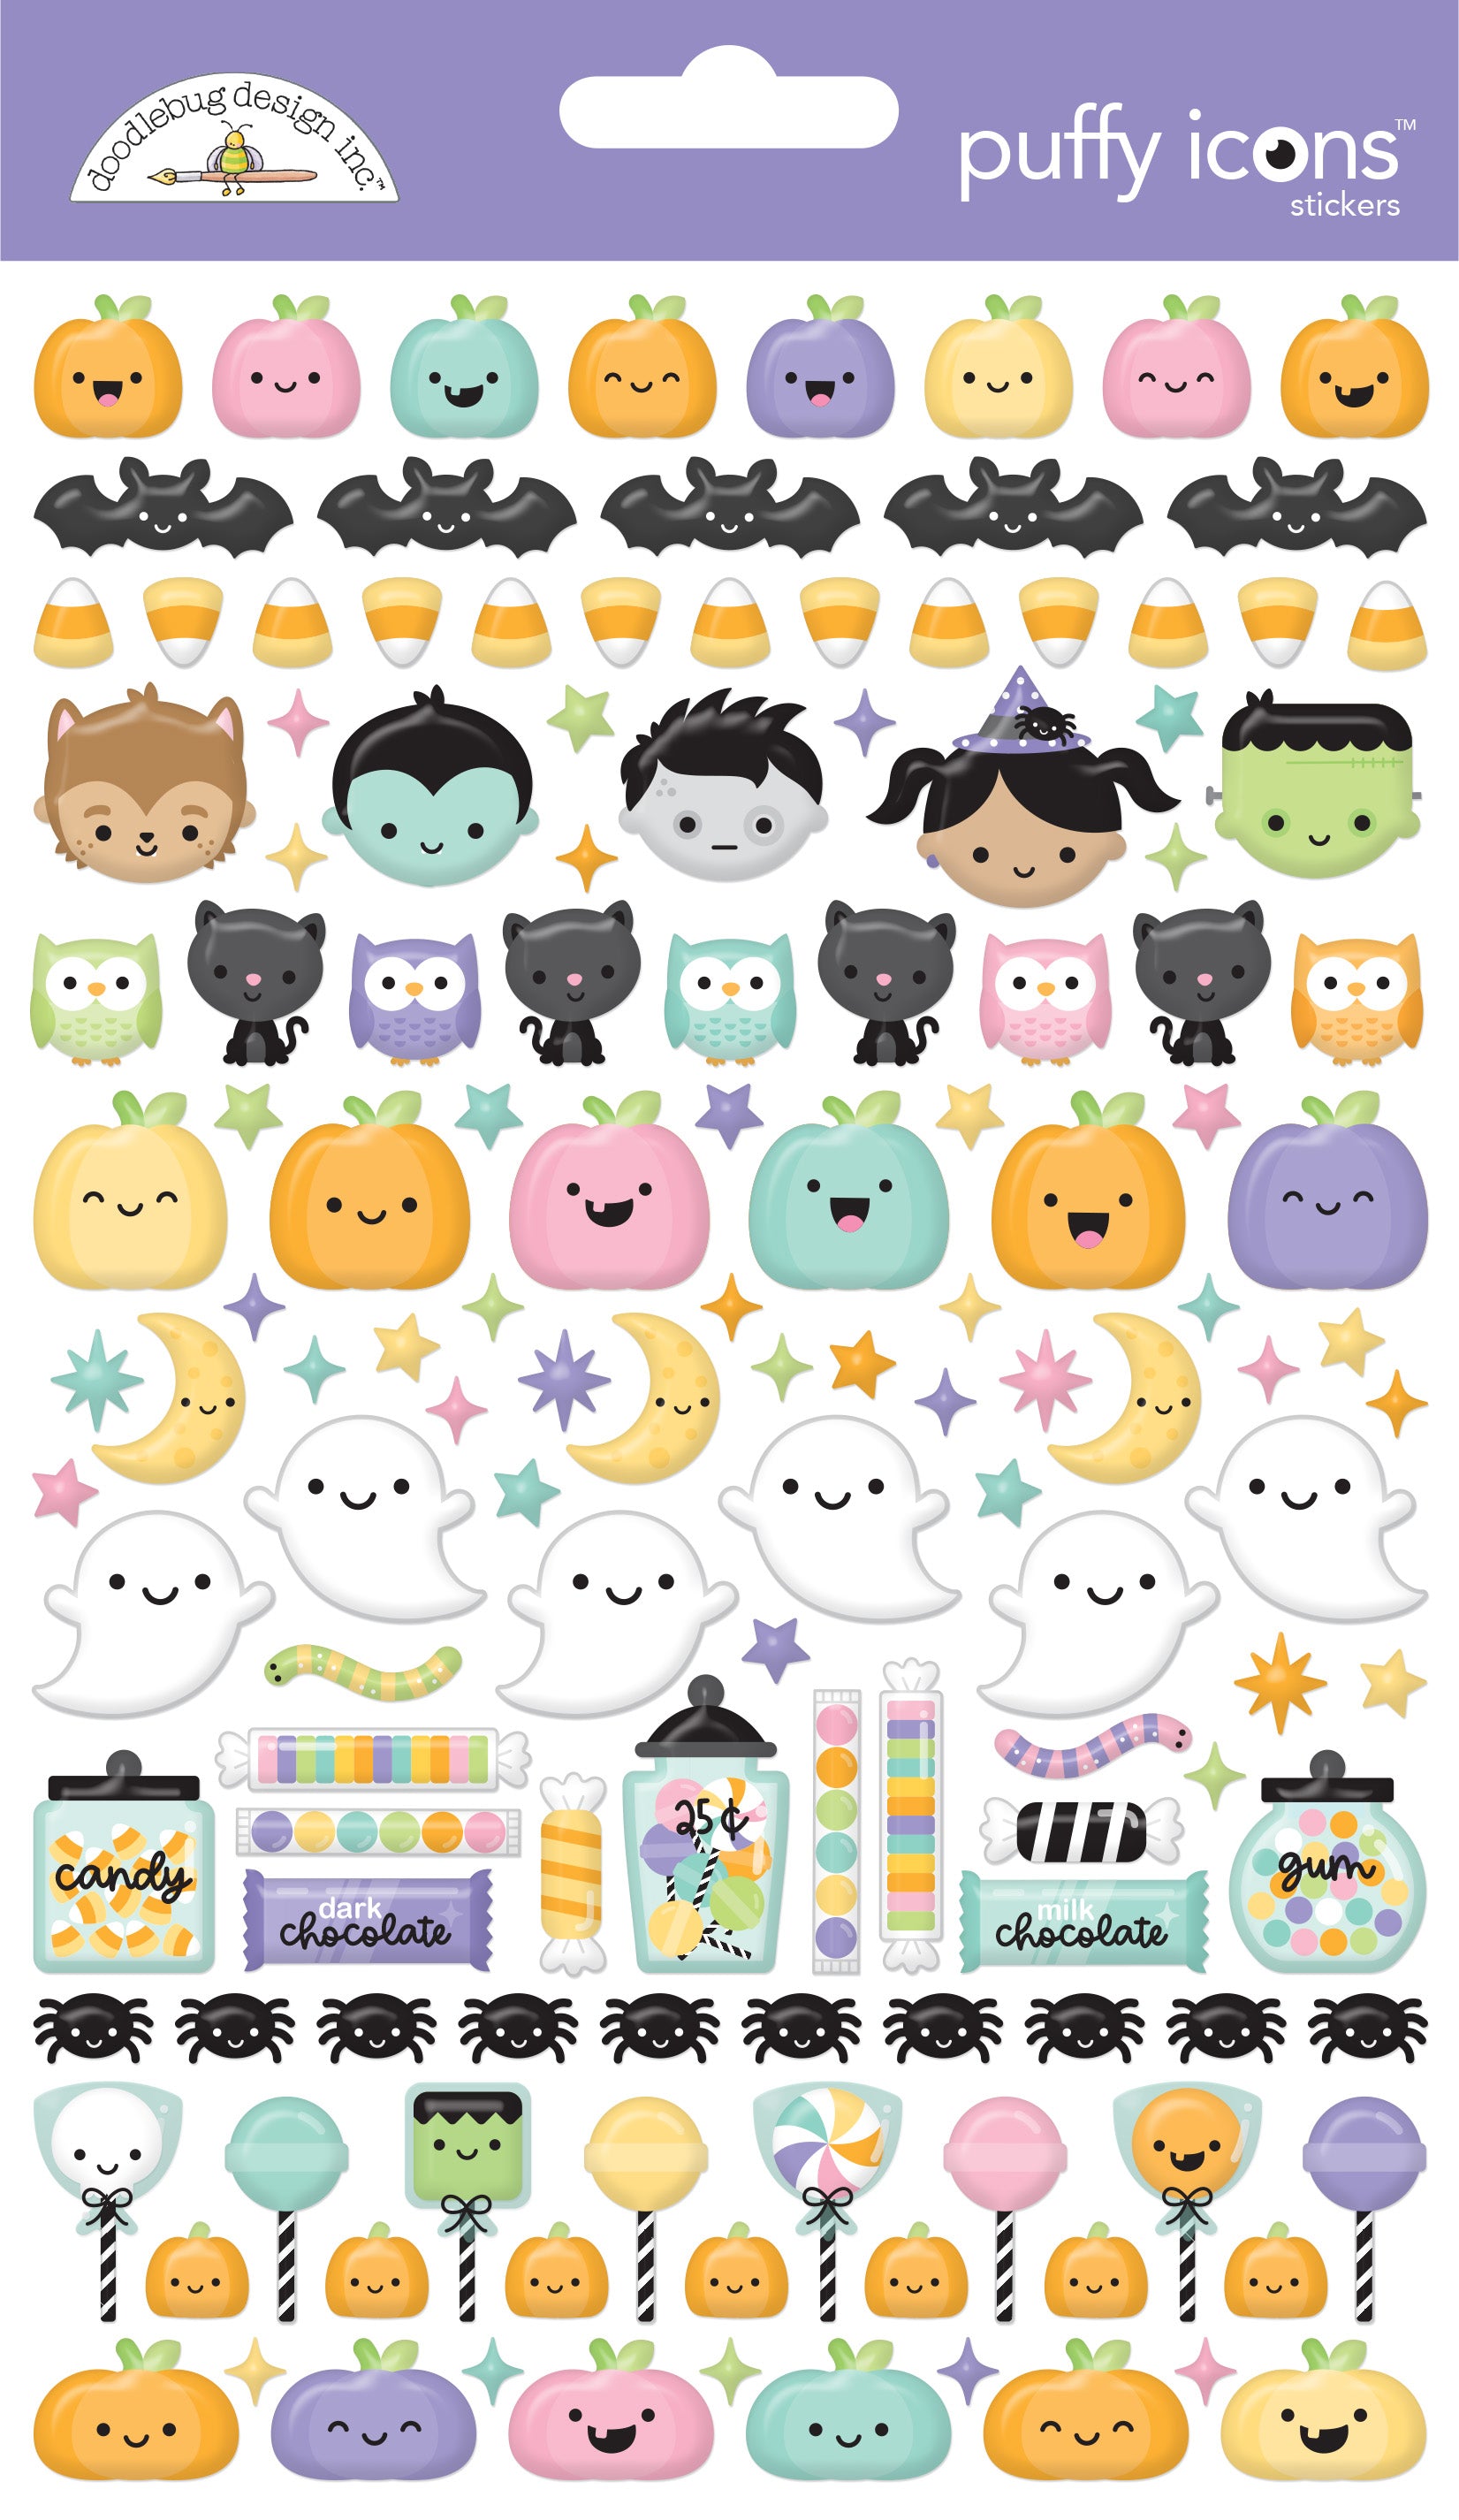 Puffy Candy Stickers